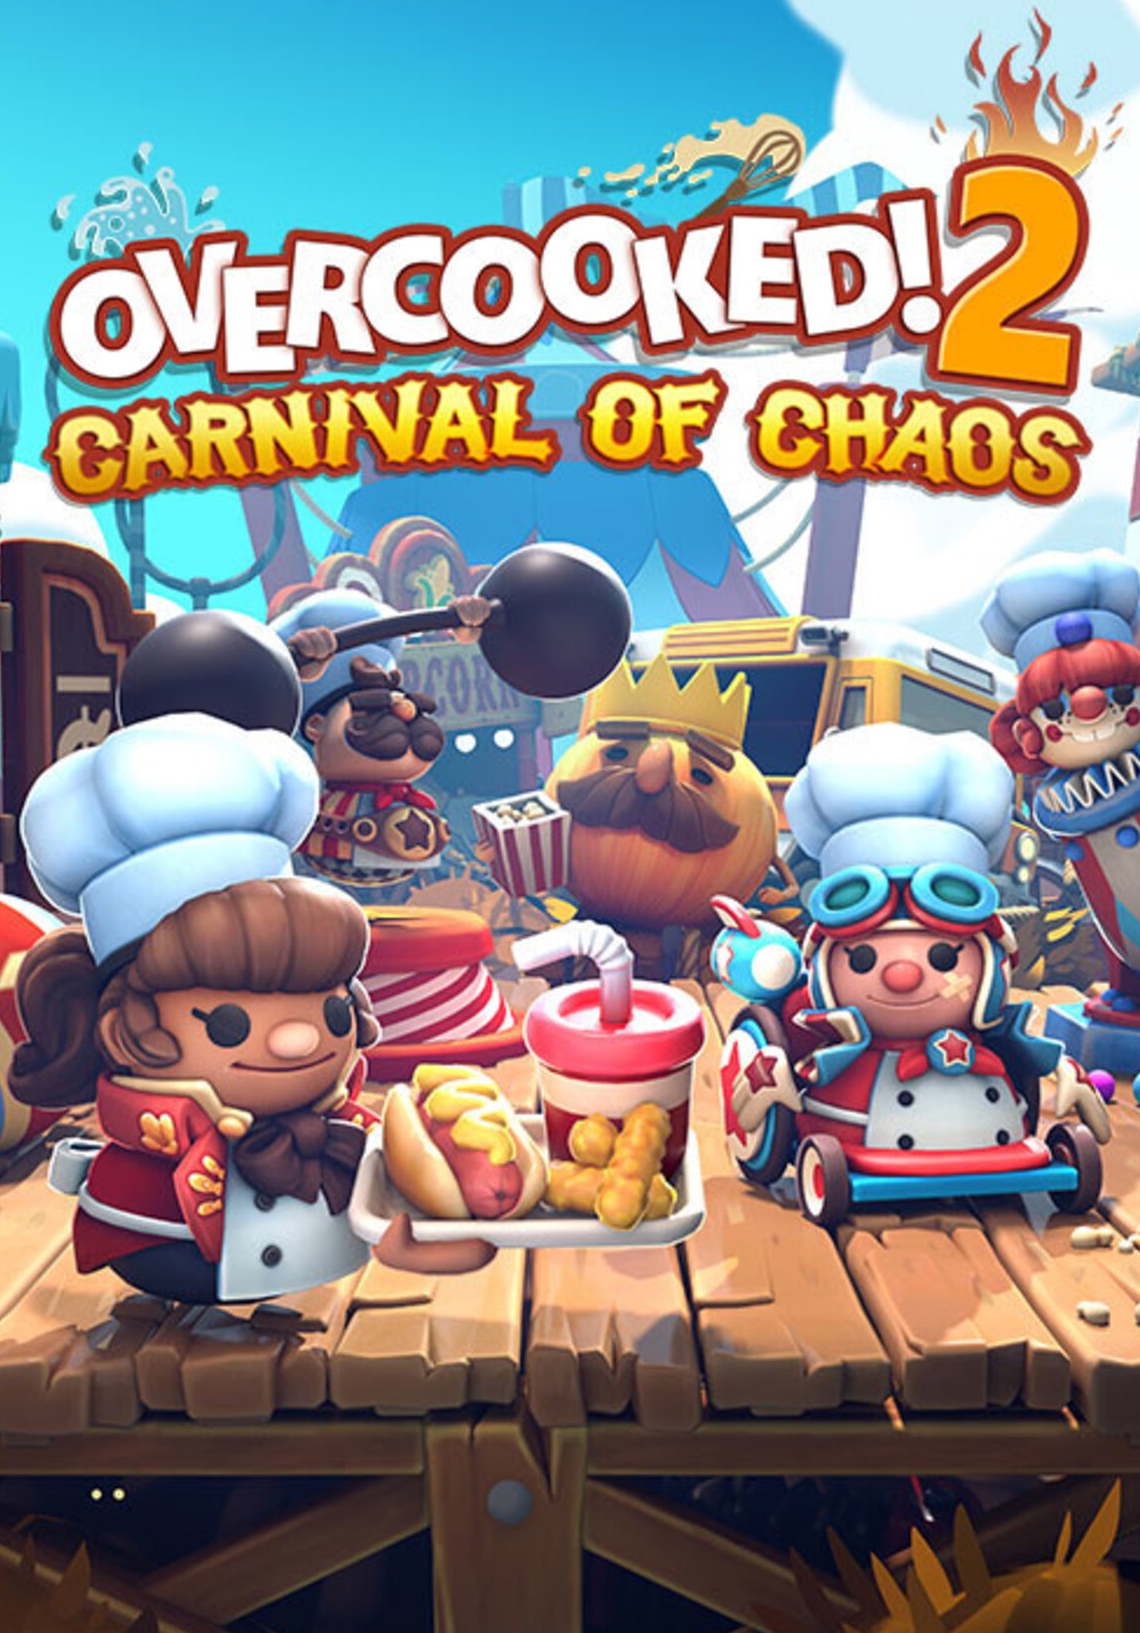 Overcooked! 2 - Carnival Of Chaos